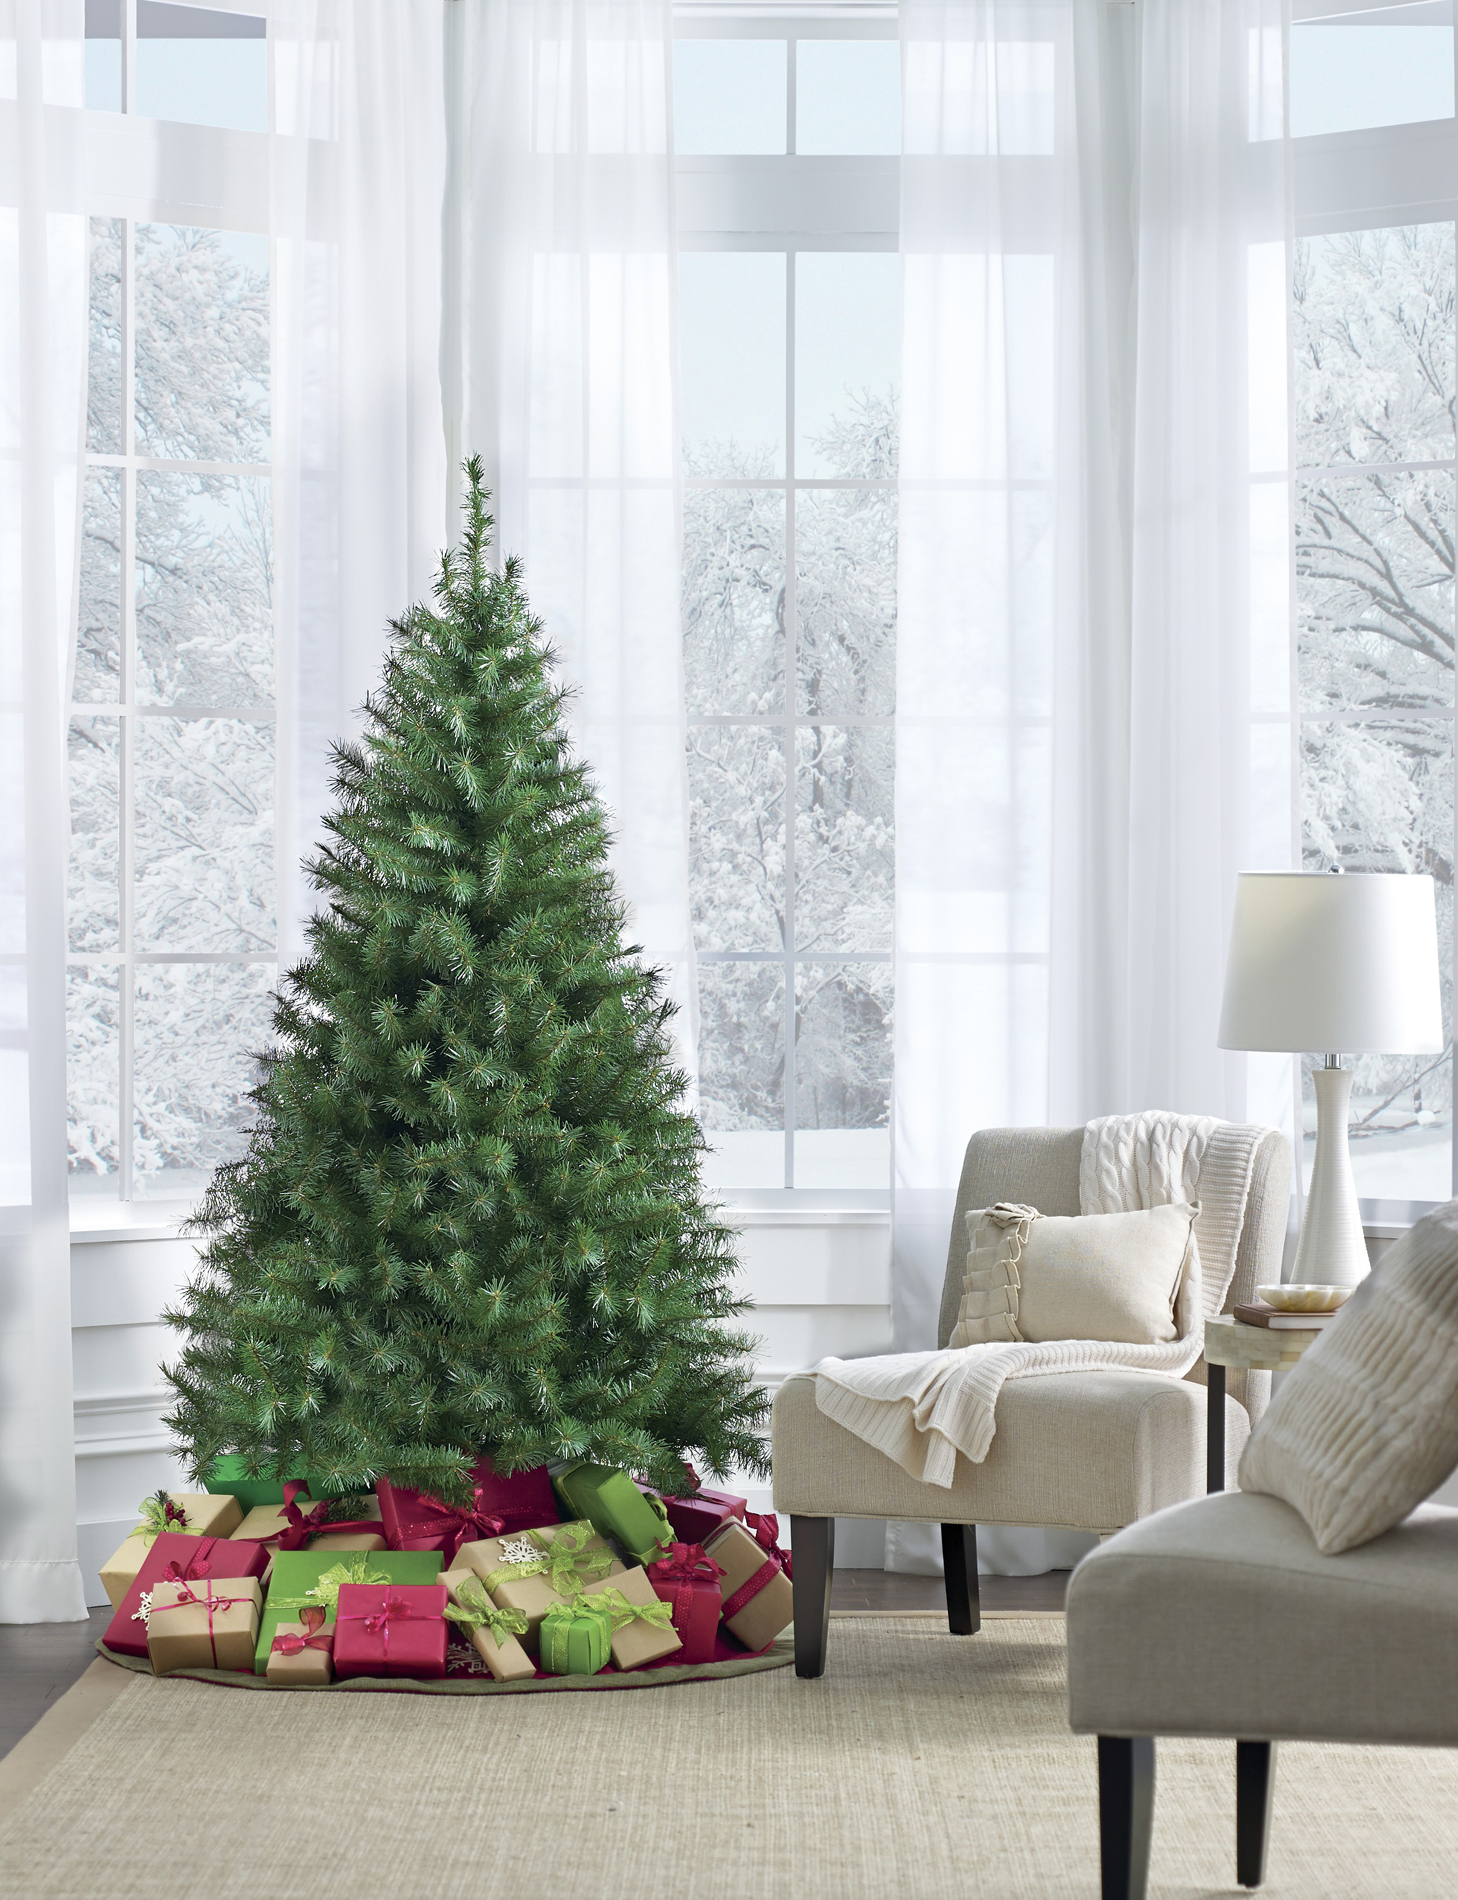 Trim A Home 6 Unlit Spruce Christmas Tree Leaves Room for Your